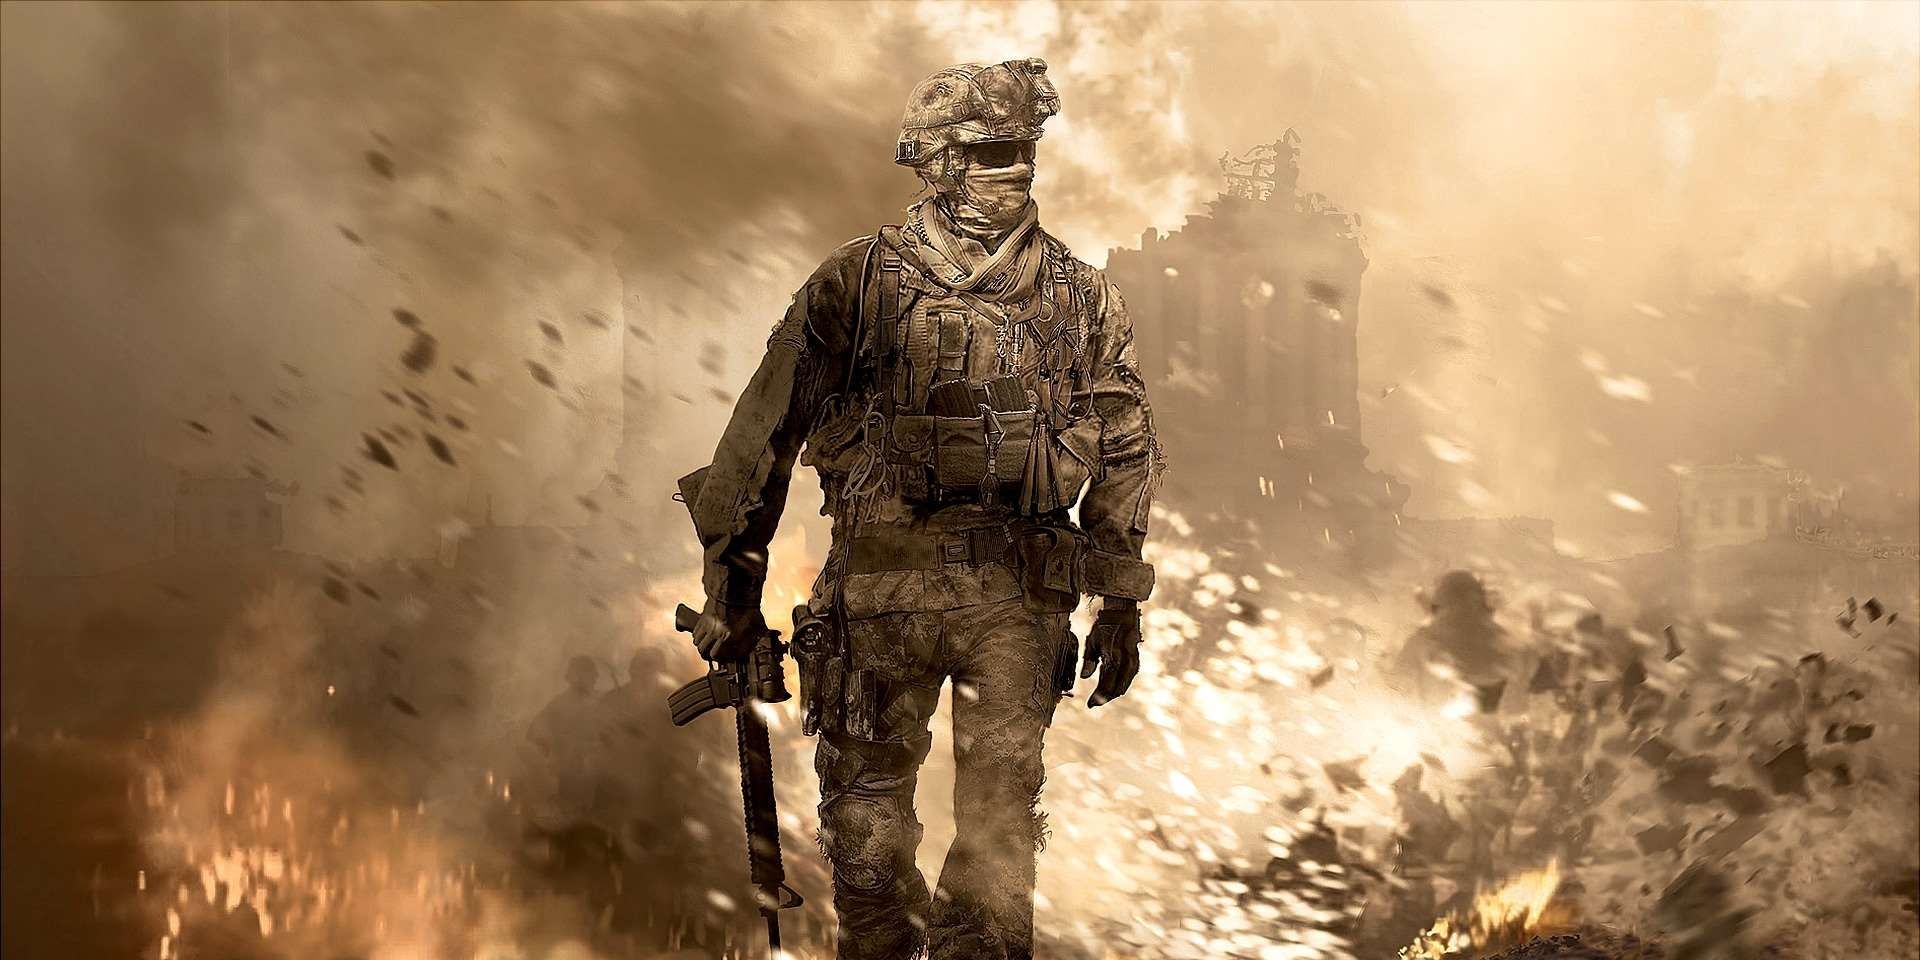 The cover art for Call of Duty: Modern Warfare 2